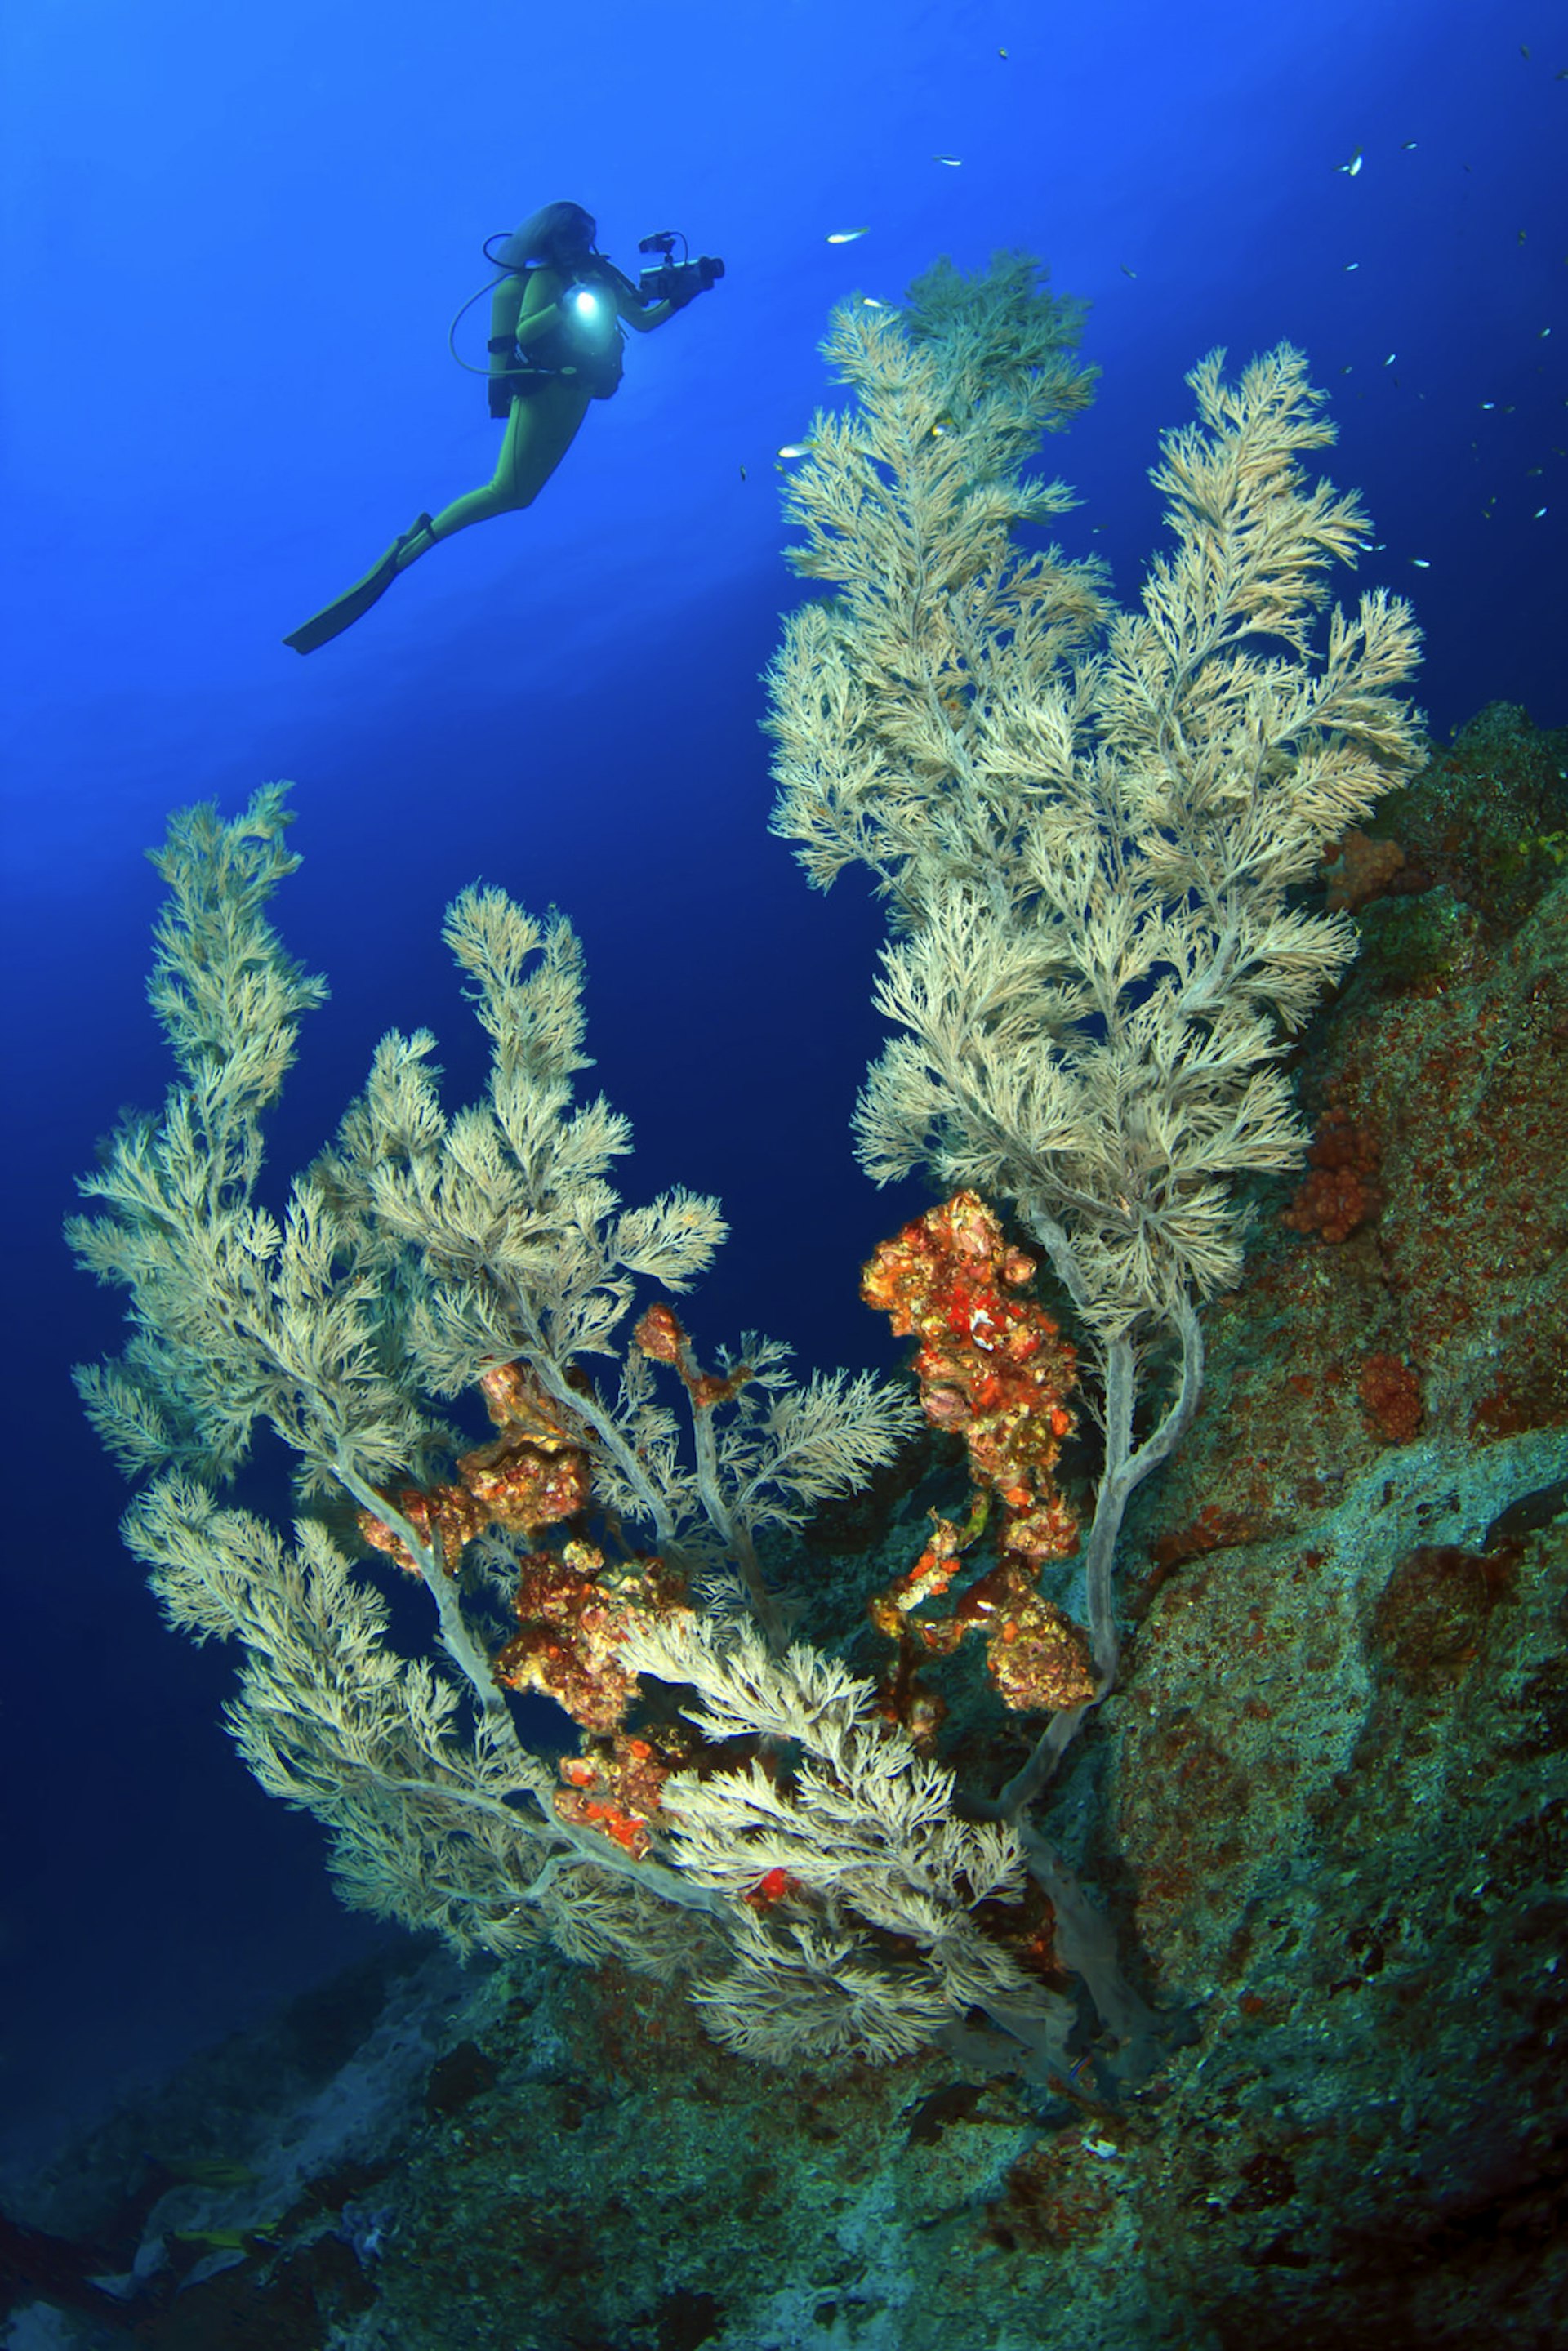 Diver swimming among coral in the sea © Photosub Images / Getty Images